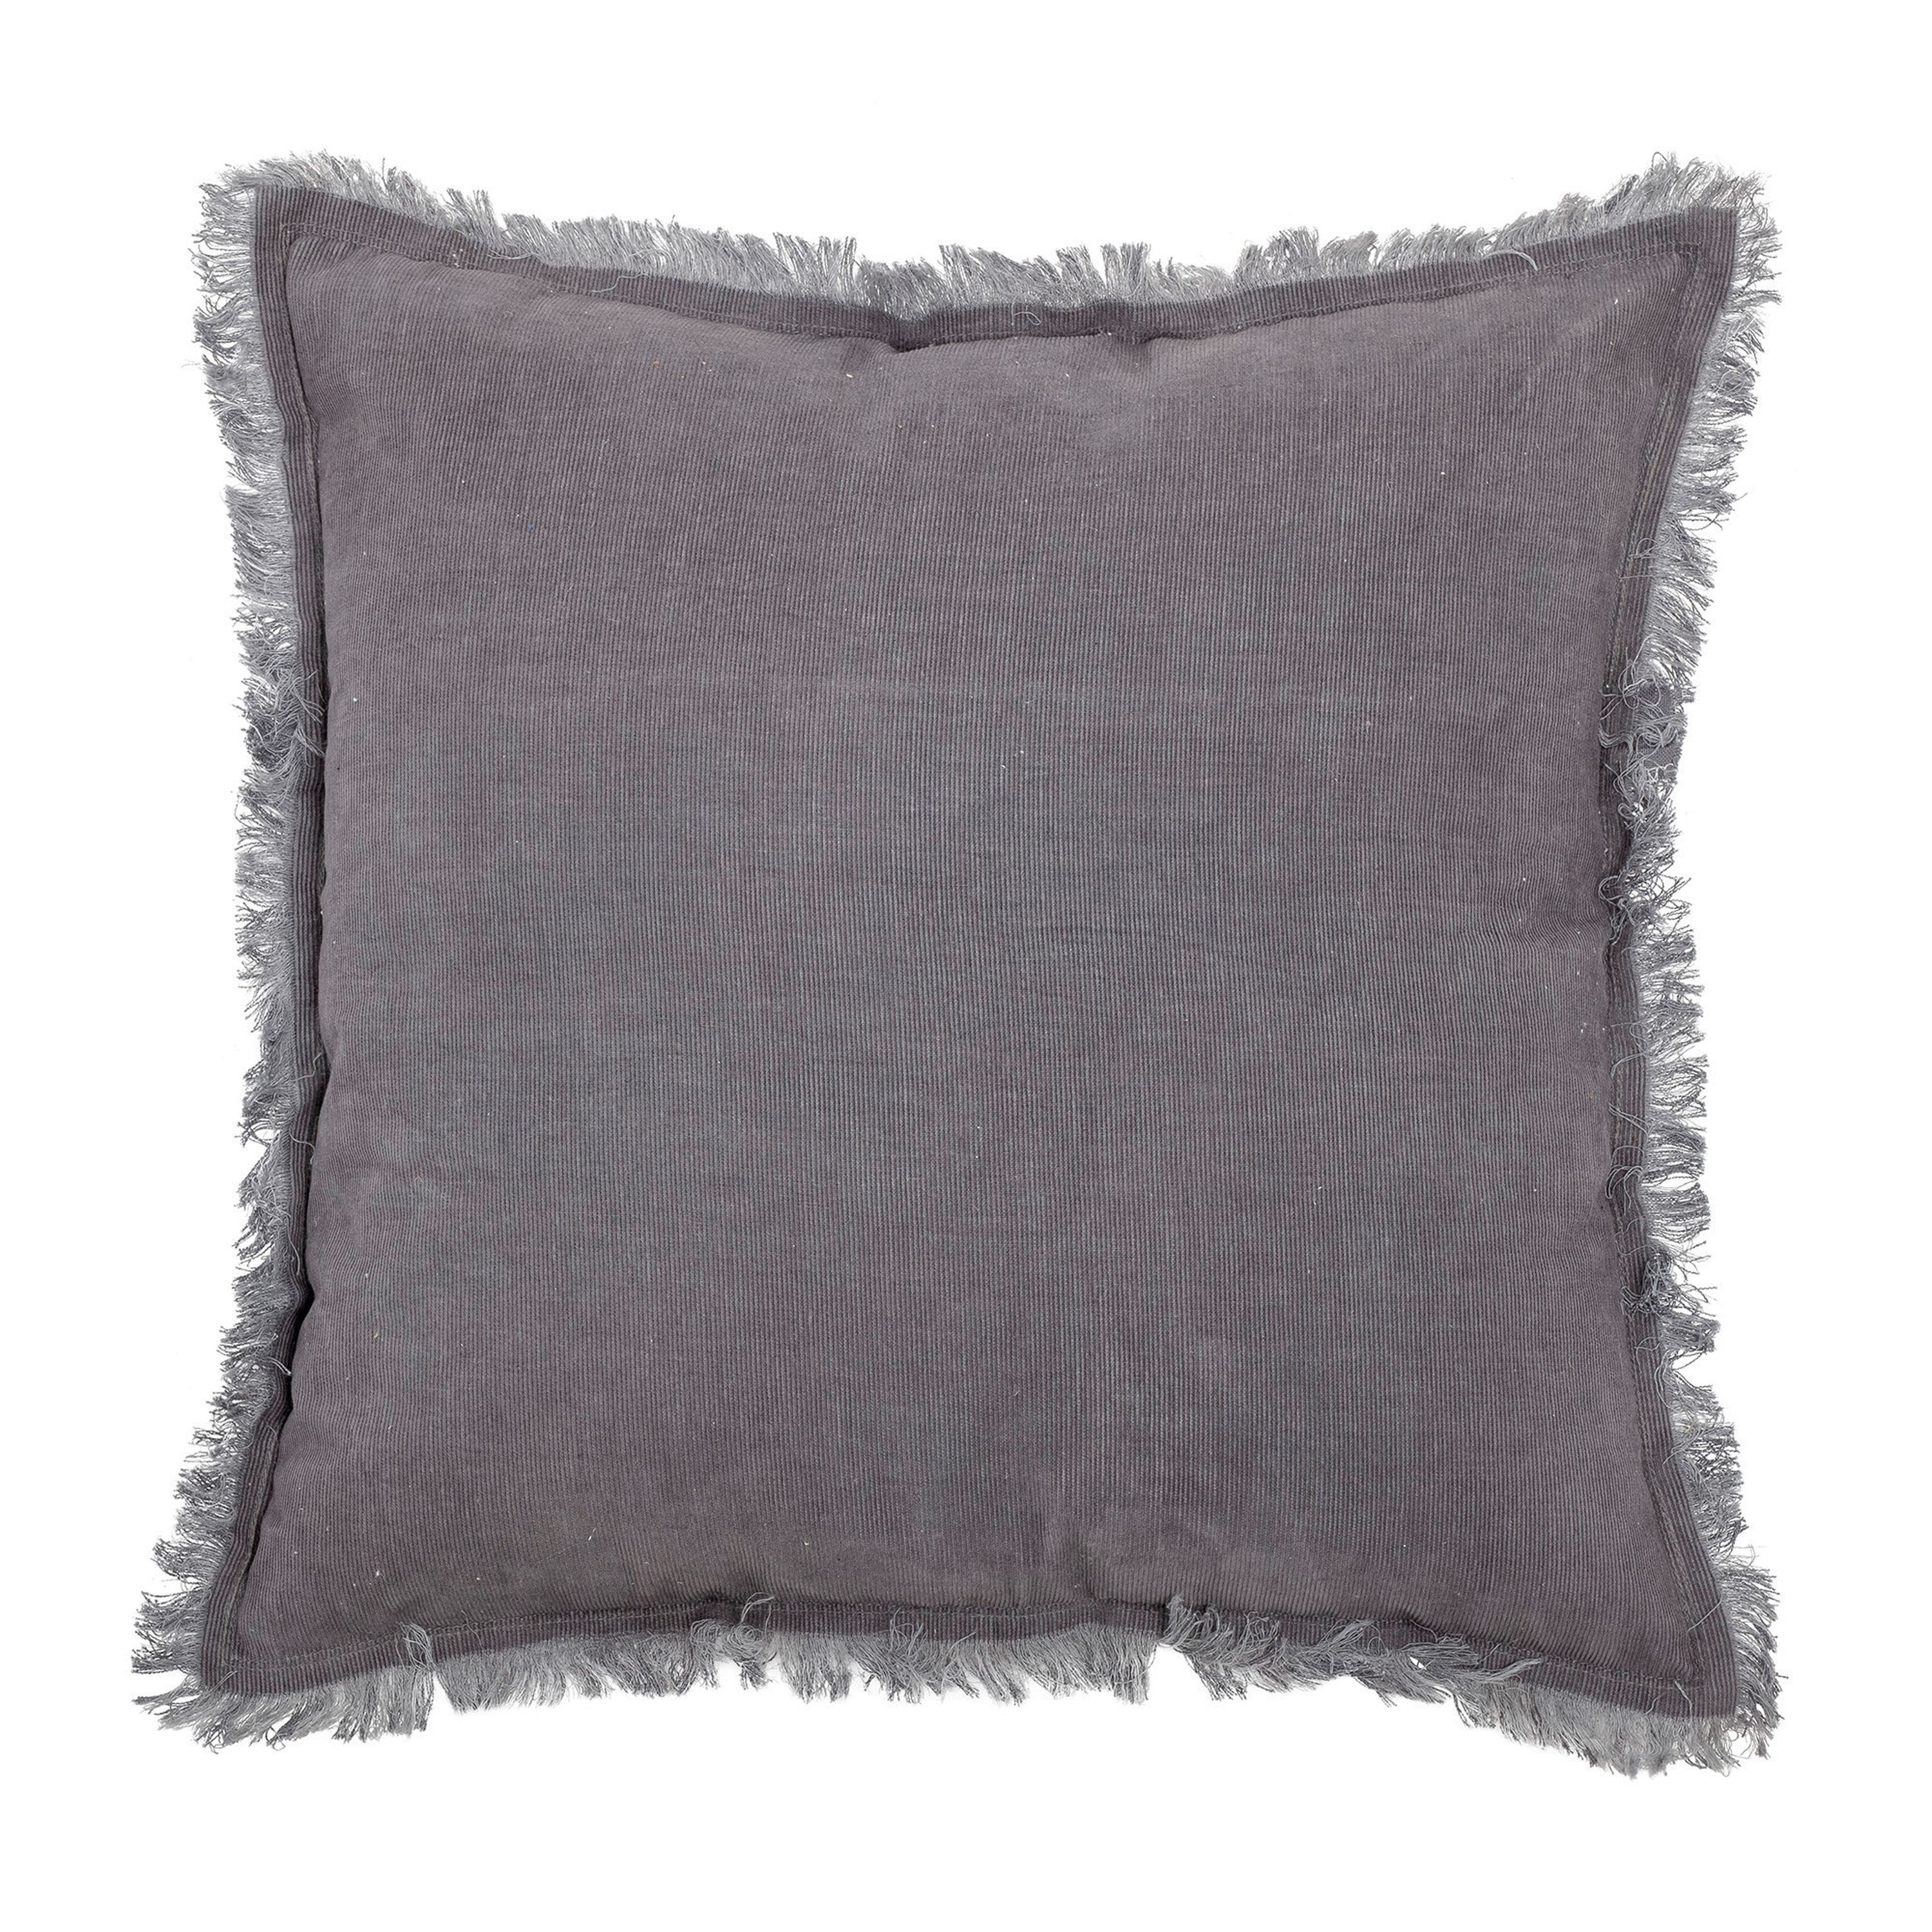 Cotton Blend Corduroy Throw Pillow by Sprinkle & Bloom | Walmart (US)